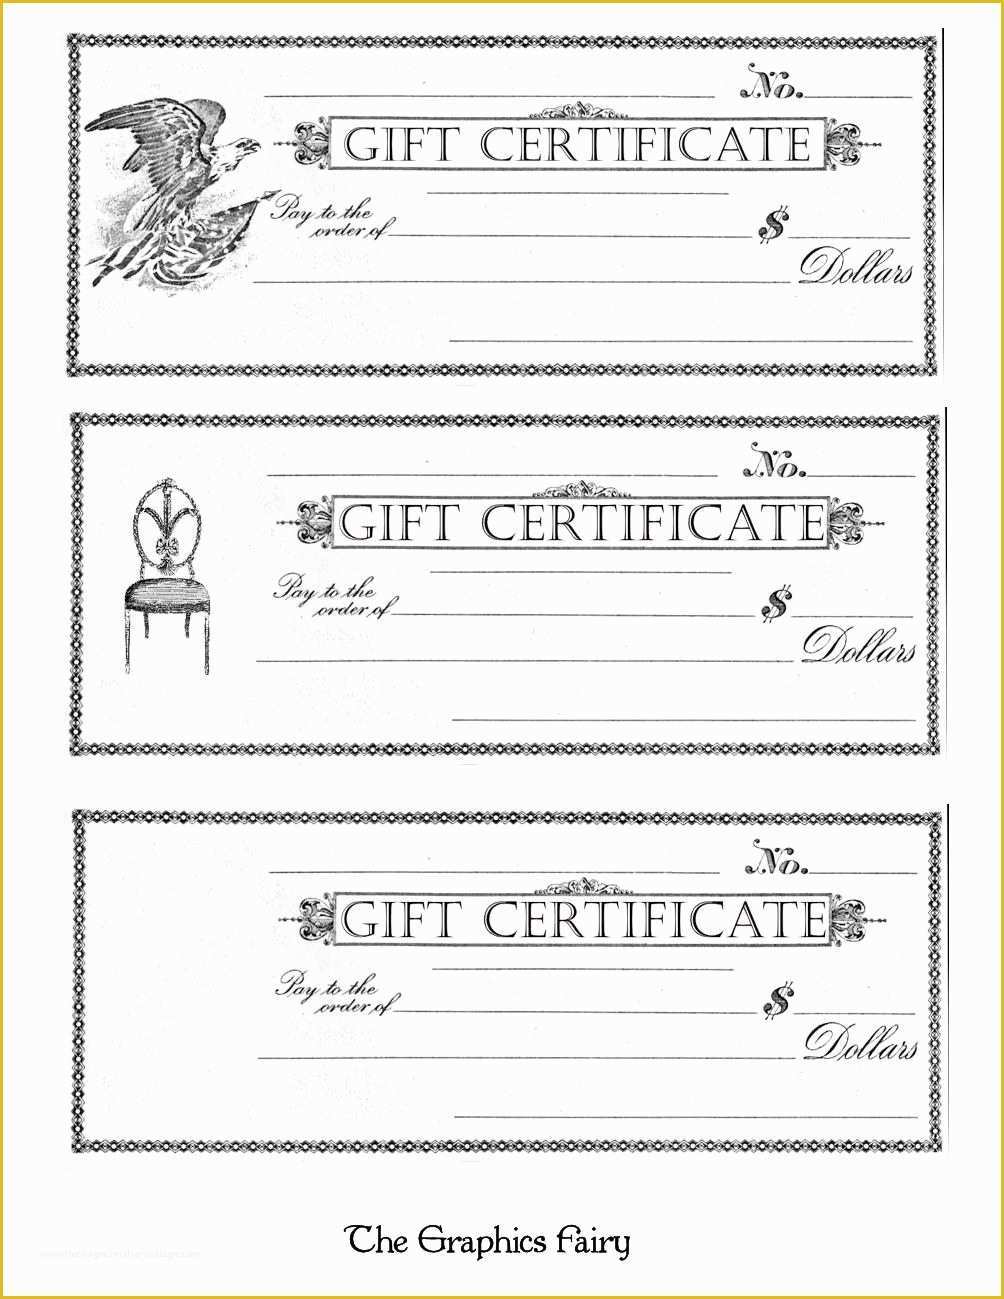 Free Printable Gift Certificates Templates Of Free Printable Gift Certificates the Graphics Fairy